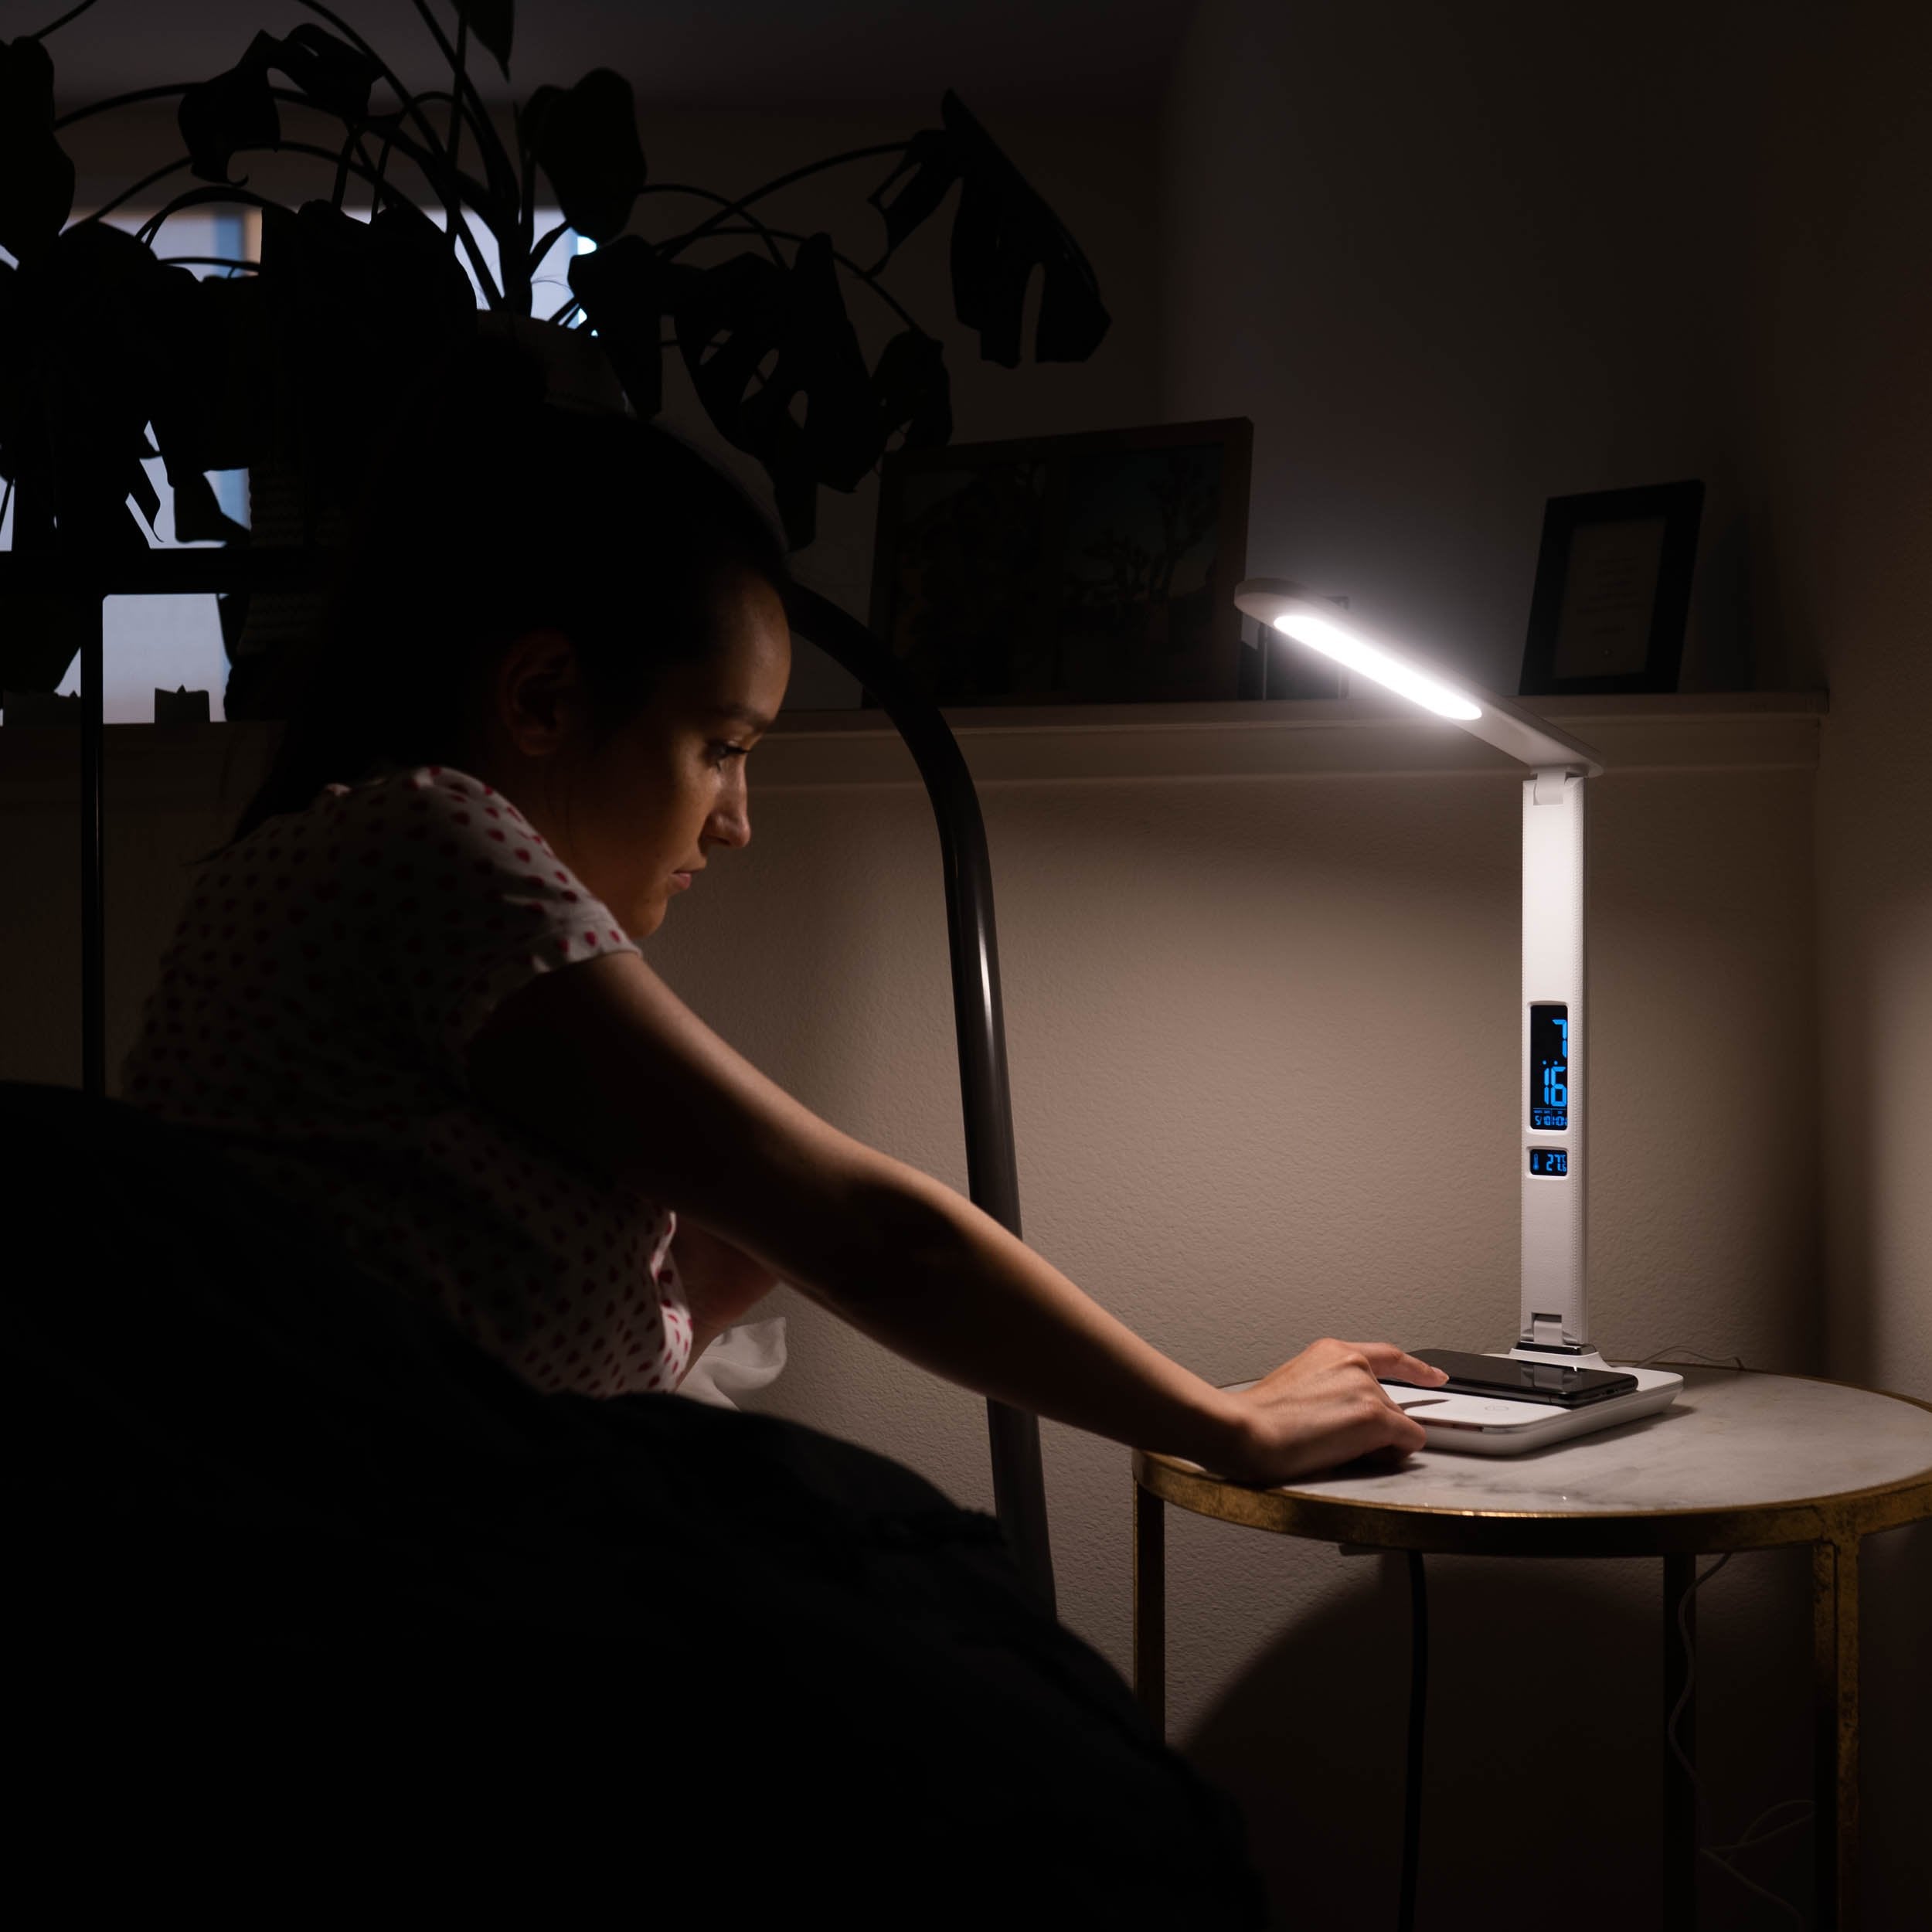 A woman turning on a therapy lamp next to her bed